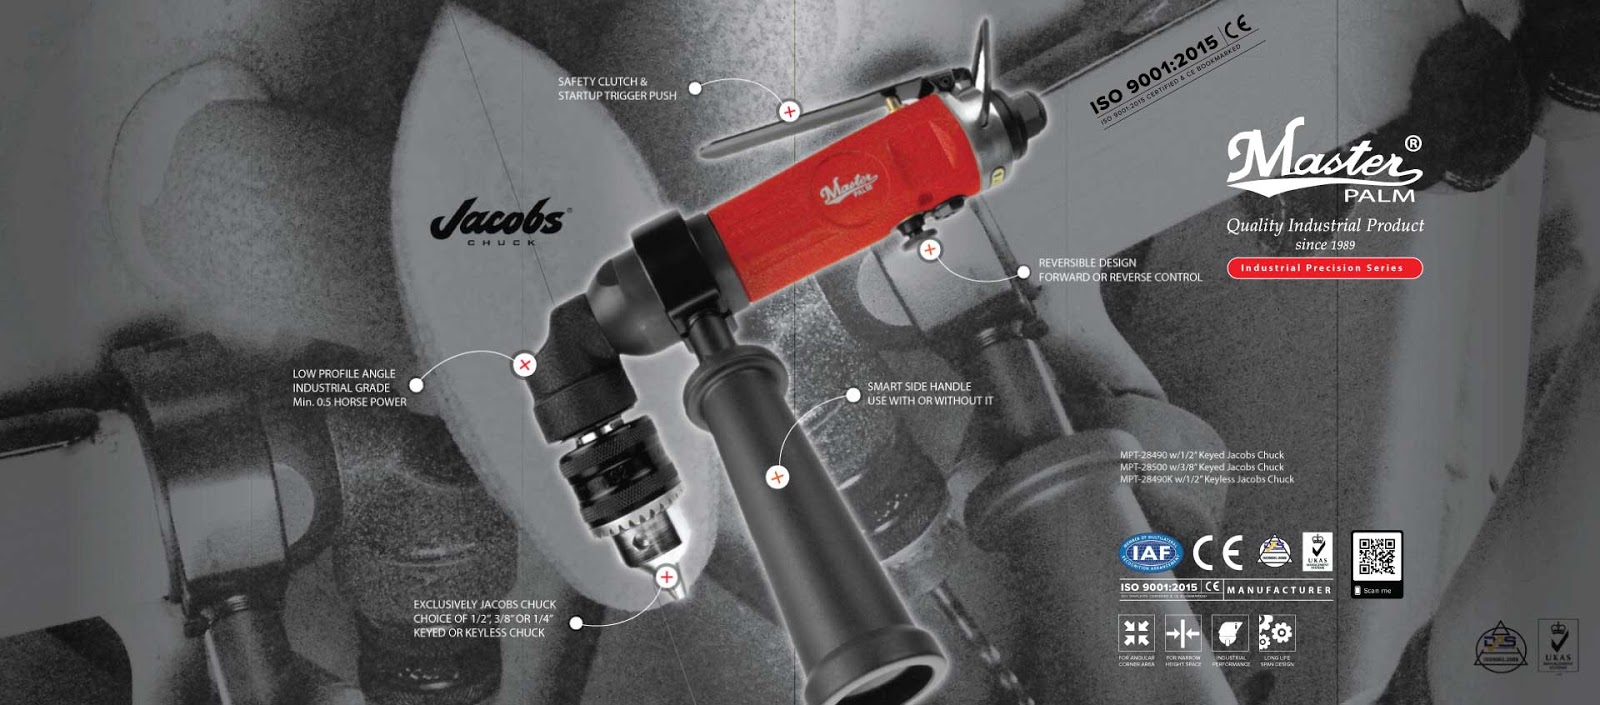 2019 Master Palm Industrial Air Tool Catalog